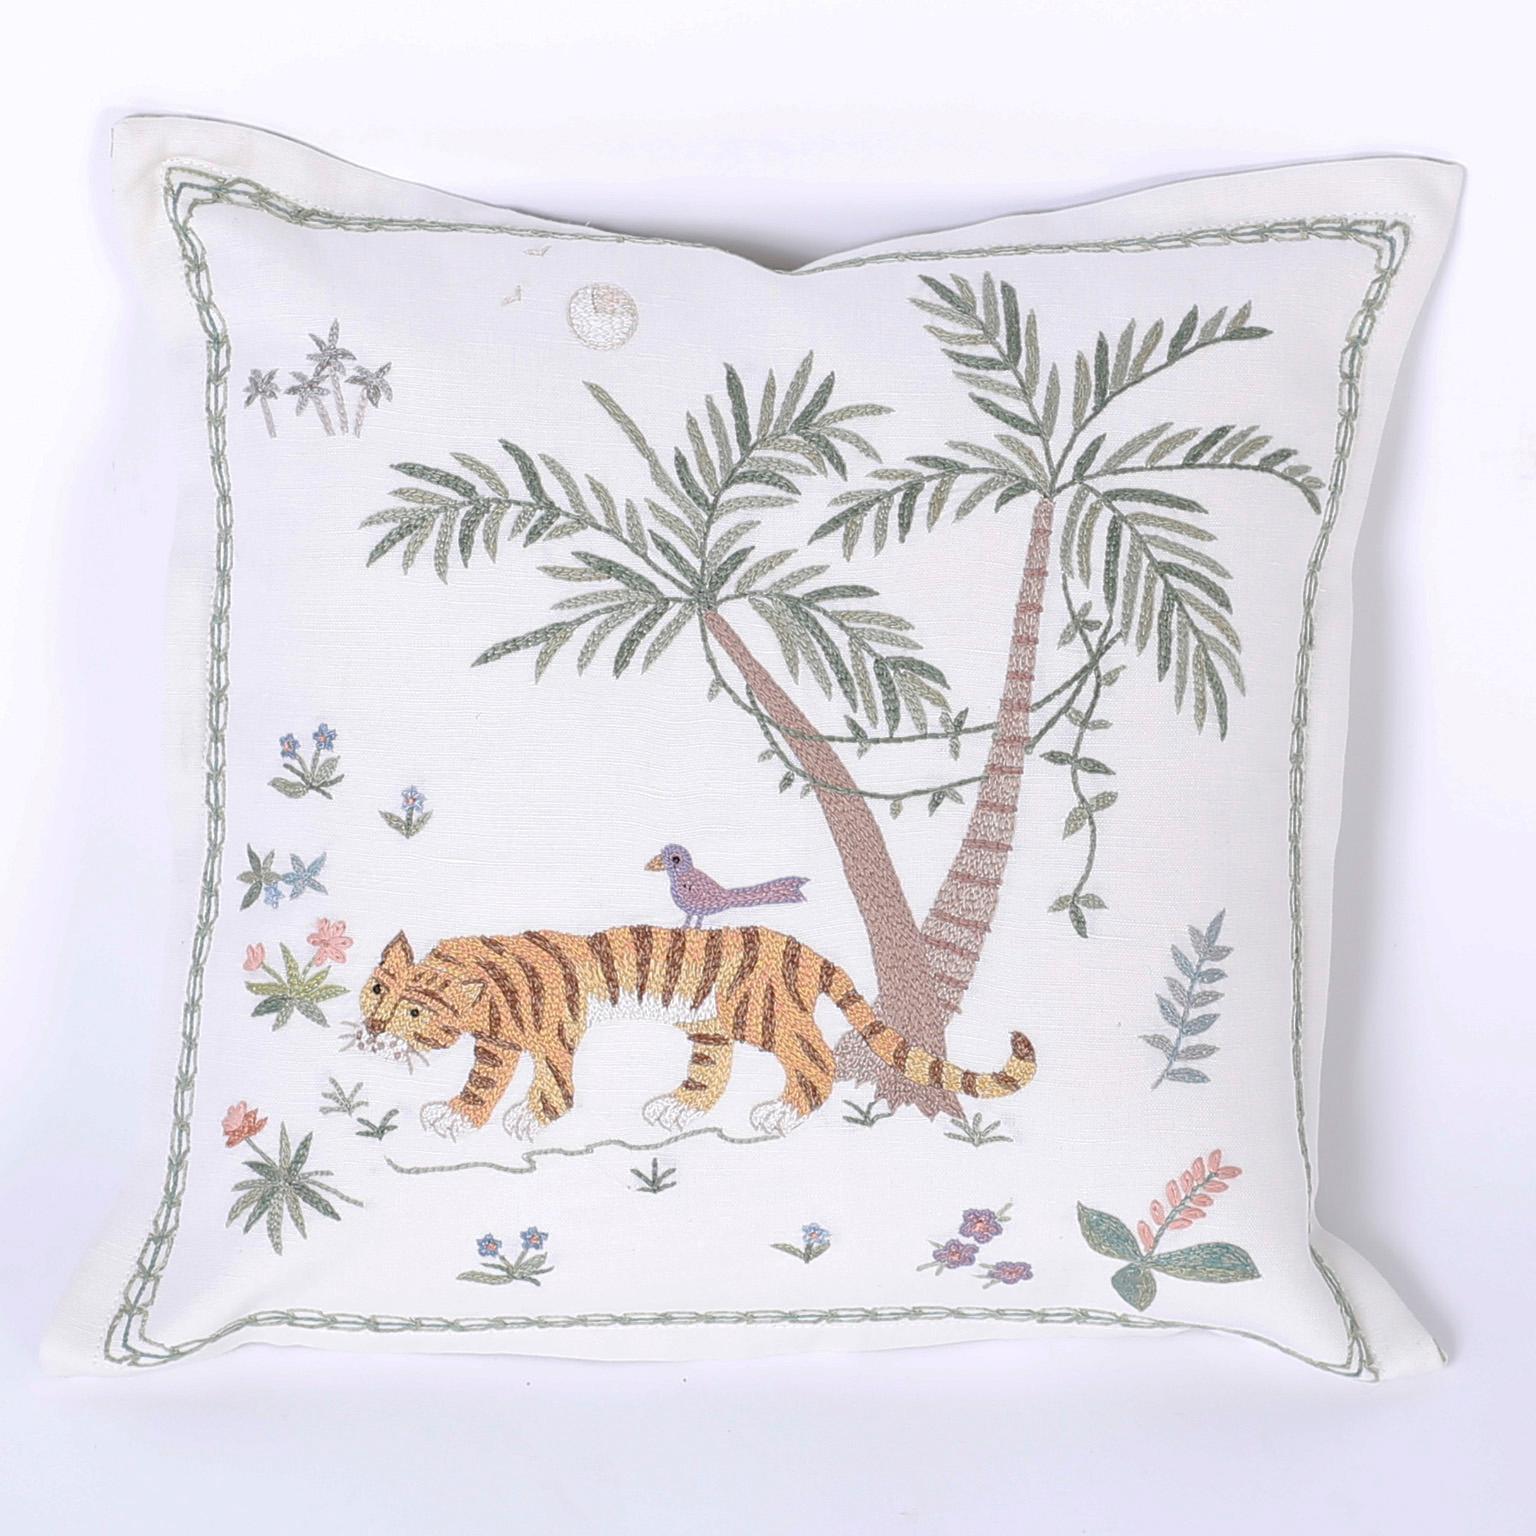 Whimsical pair of linen pillows hand decorated with a tiger and a bird under a palm tree. Button back for easy care. Priced individually.